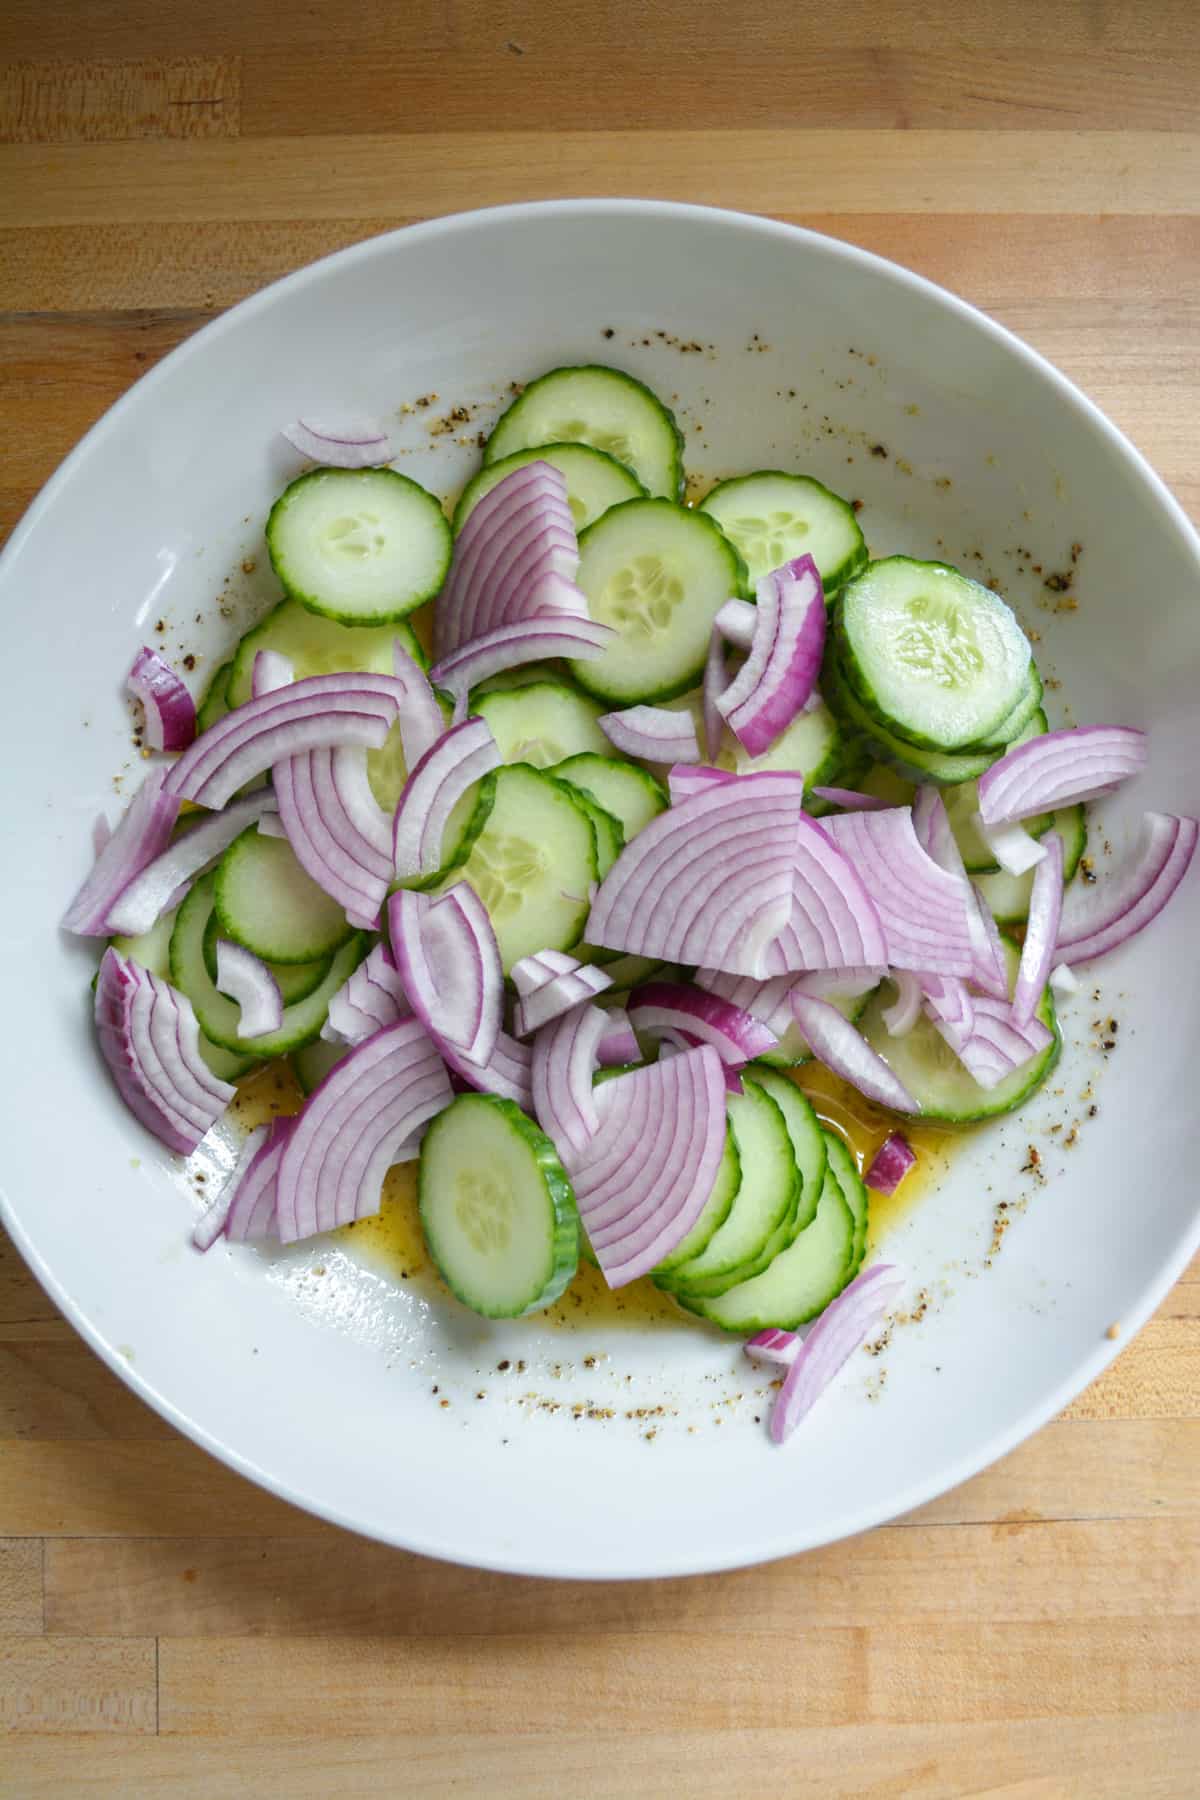 Sliced cucumber and sliced red onion added into the bowl with the salad dressing.